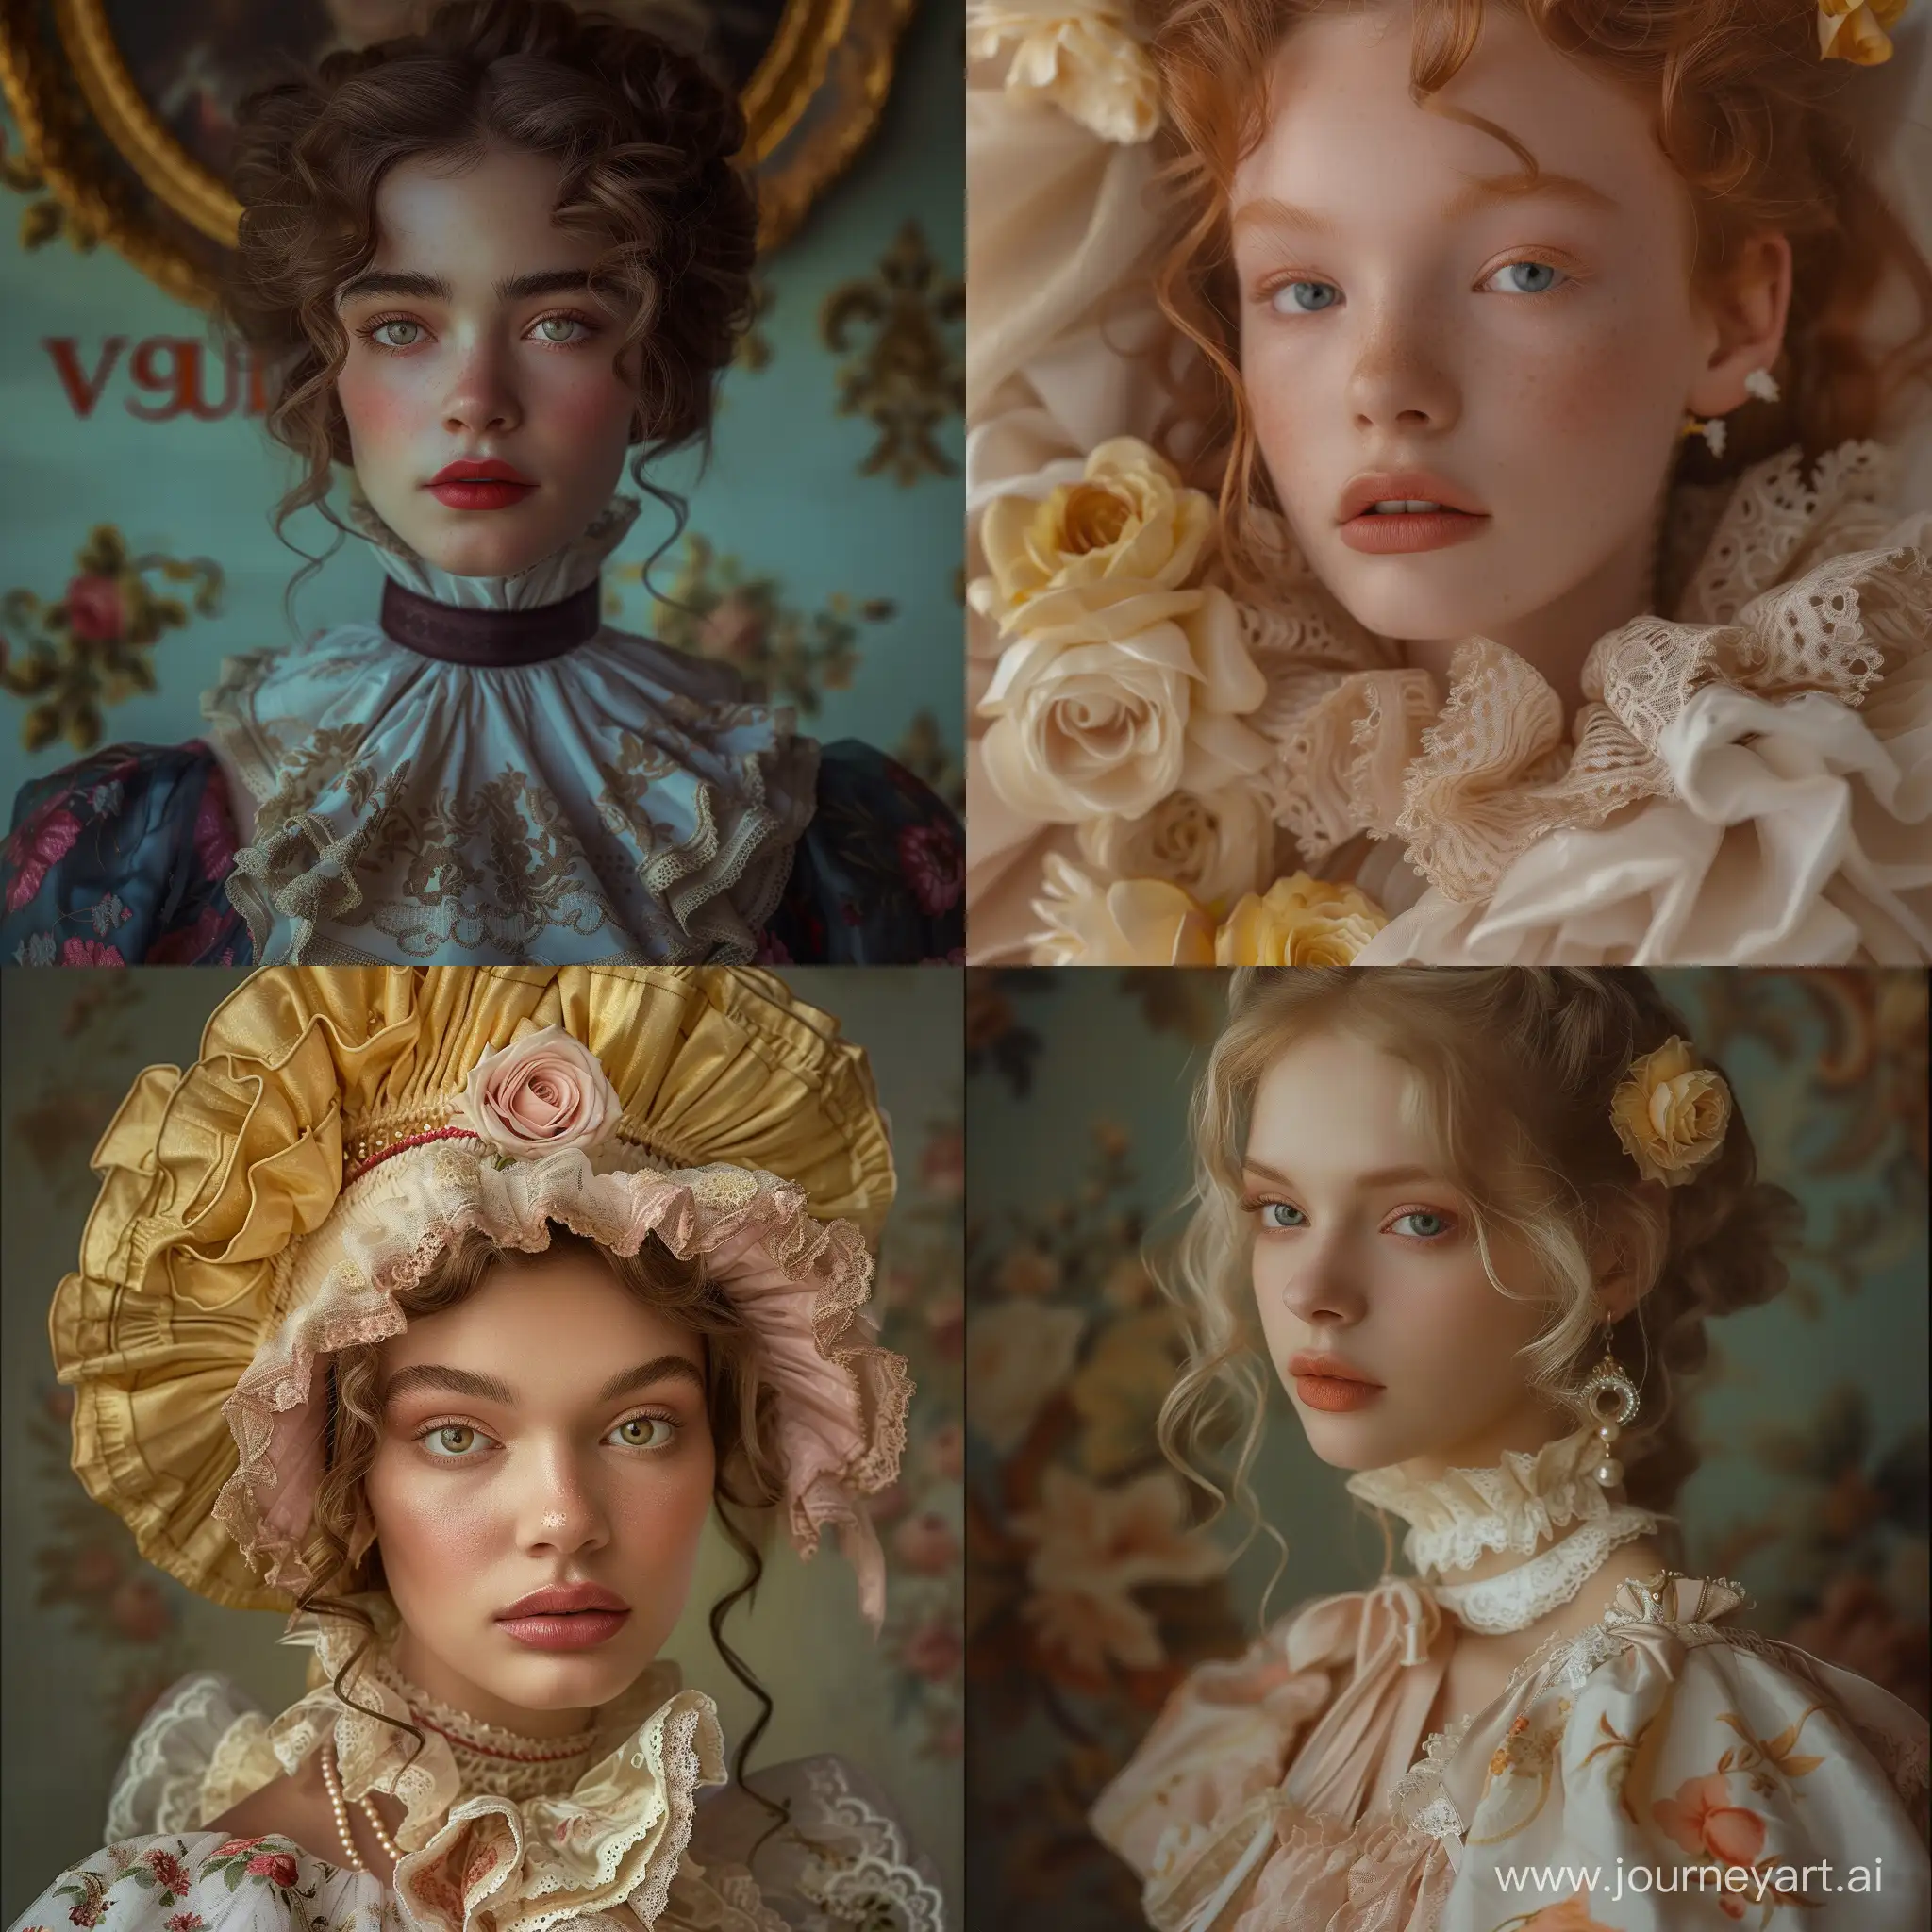 rococo, futurism, portrait of a girl, Vogue fashion cover, fashion style, Hyper-realistic photography taken on Canon EOS R5, photorealistic, sharp 8k, professional lighting